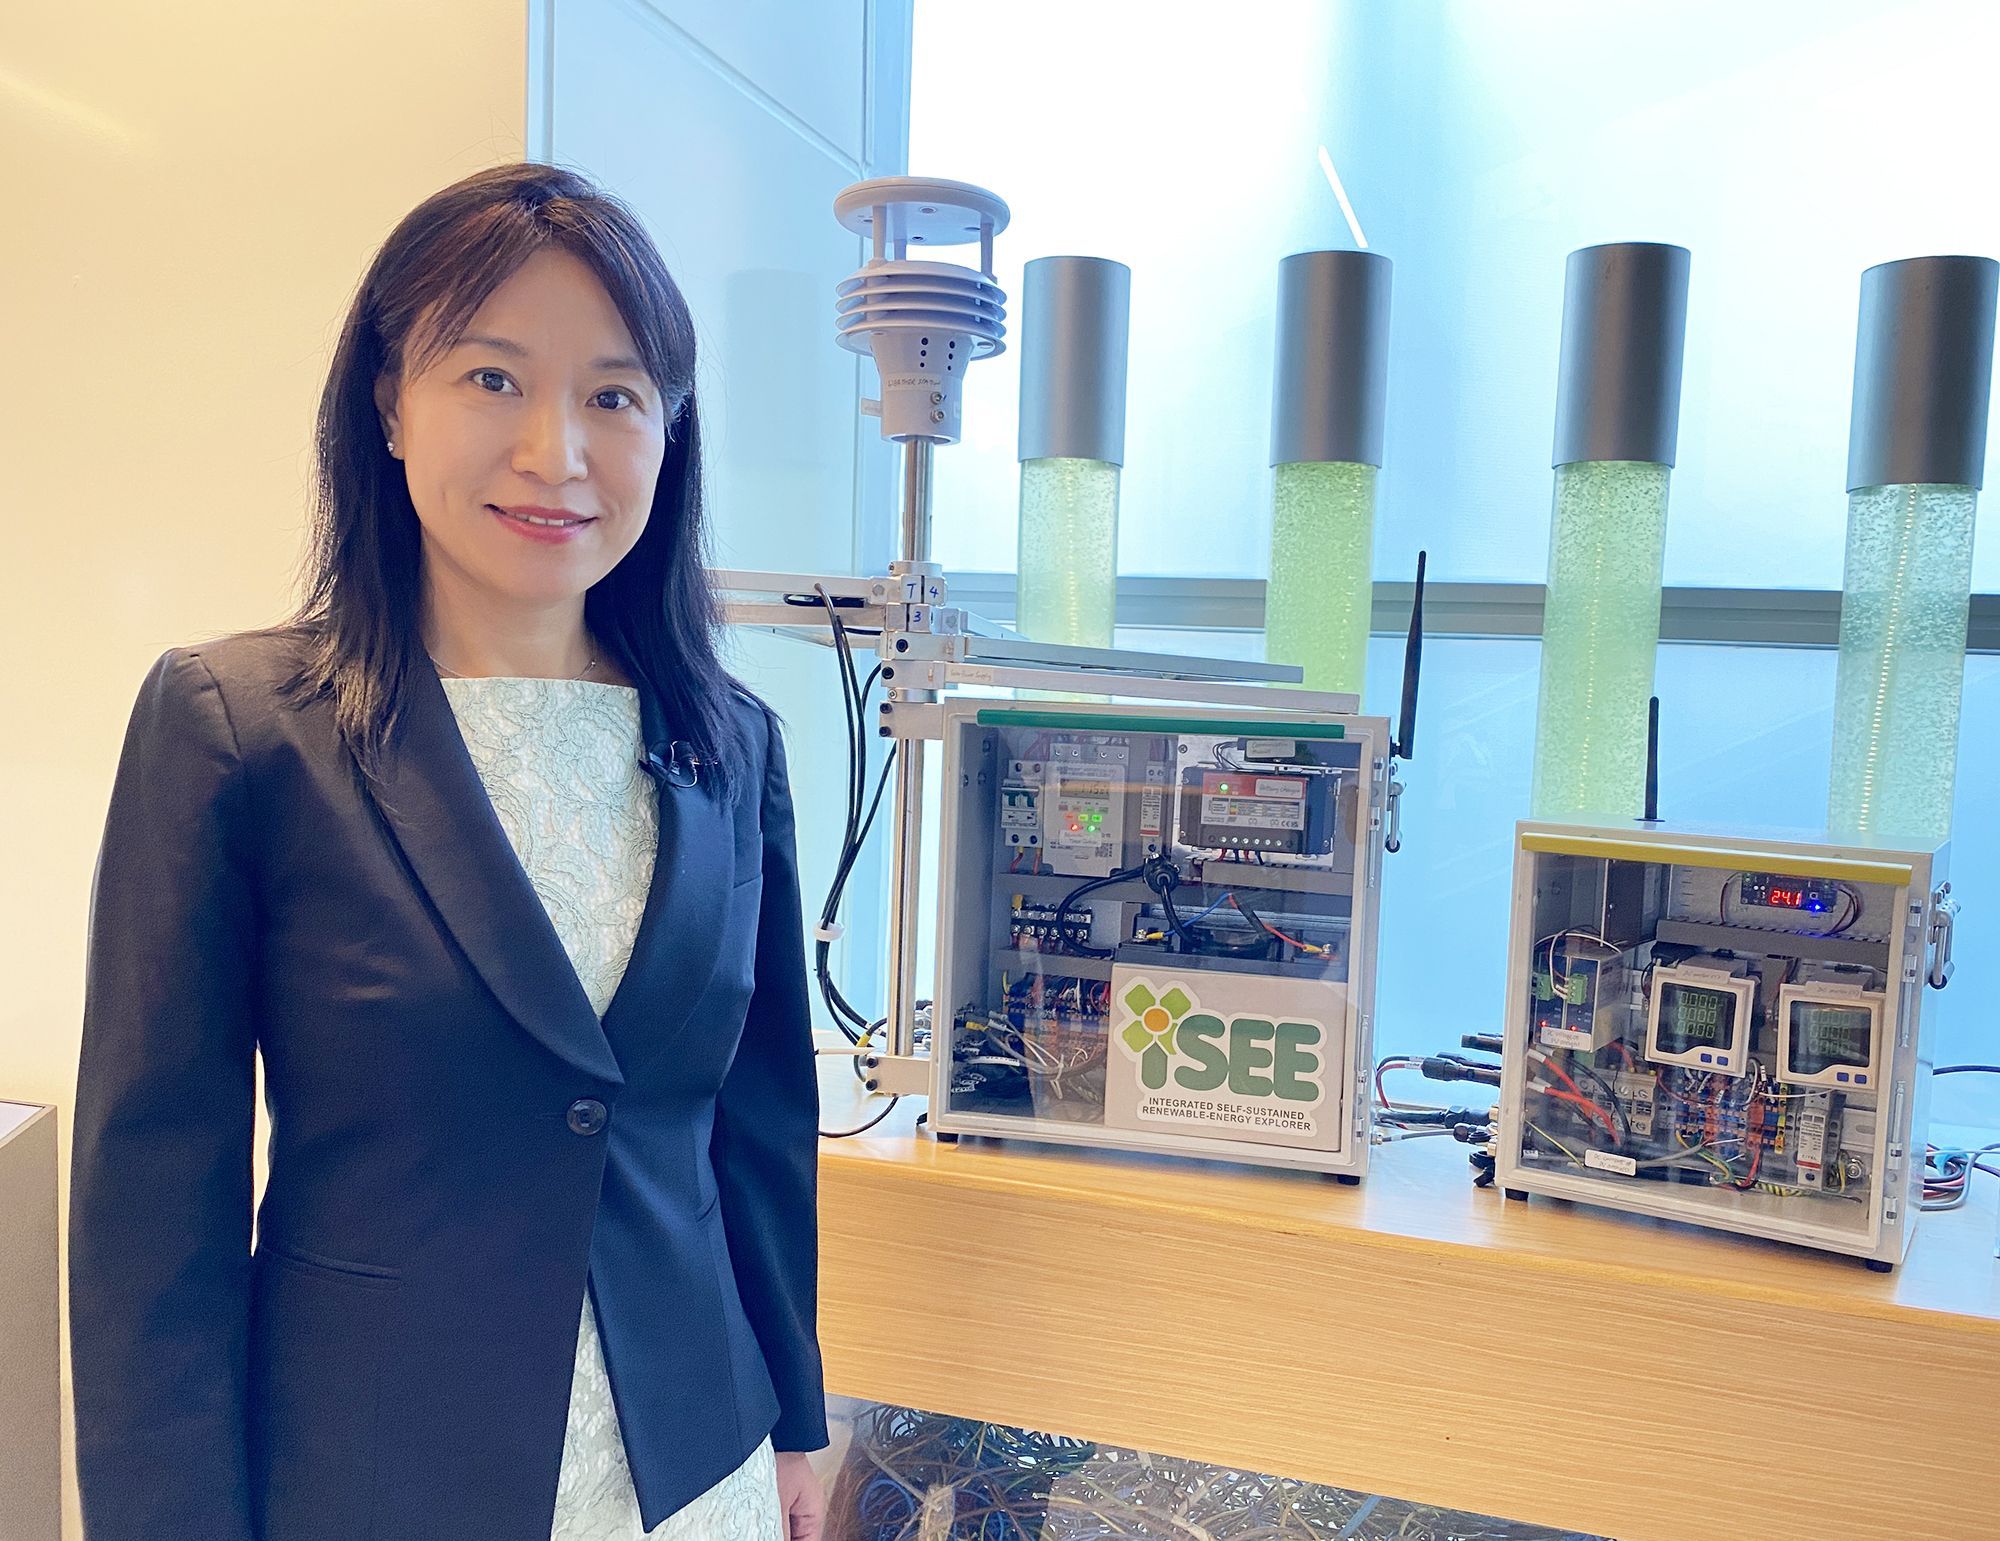 Senior Engineer (Energy Efficiency) of the EMSD, Ms CHEUNG Man-chit, Jovian, says that the Renewable-energy Explorer (iSEE) can collect real-time weather data, which can give a more accurate estimation of potential power generation of the renewable energy system and the returns it can bring.